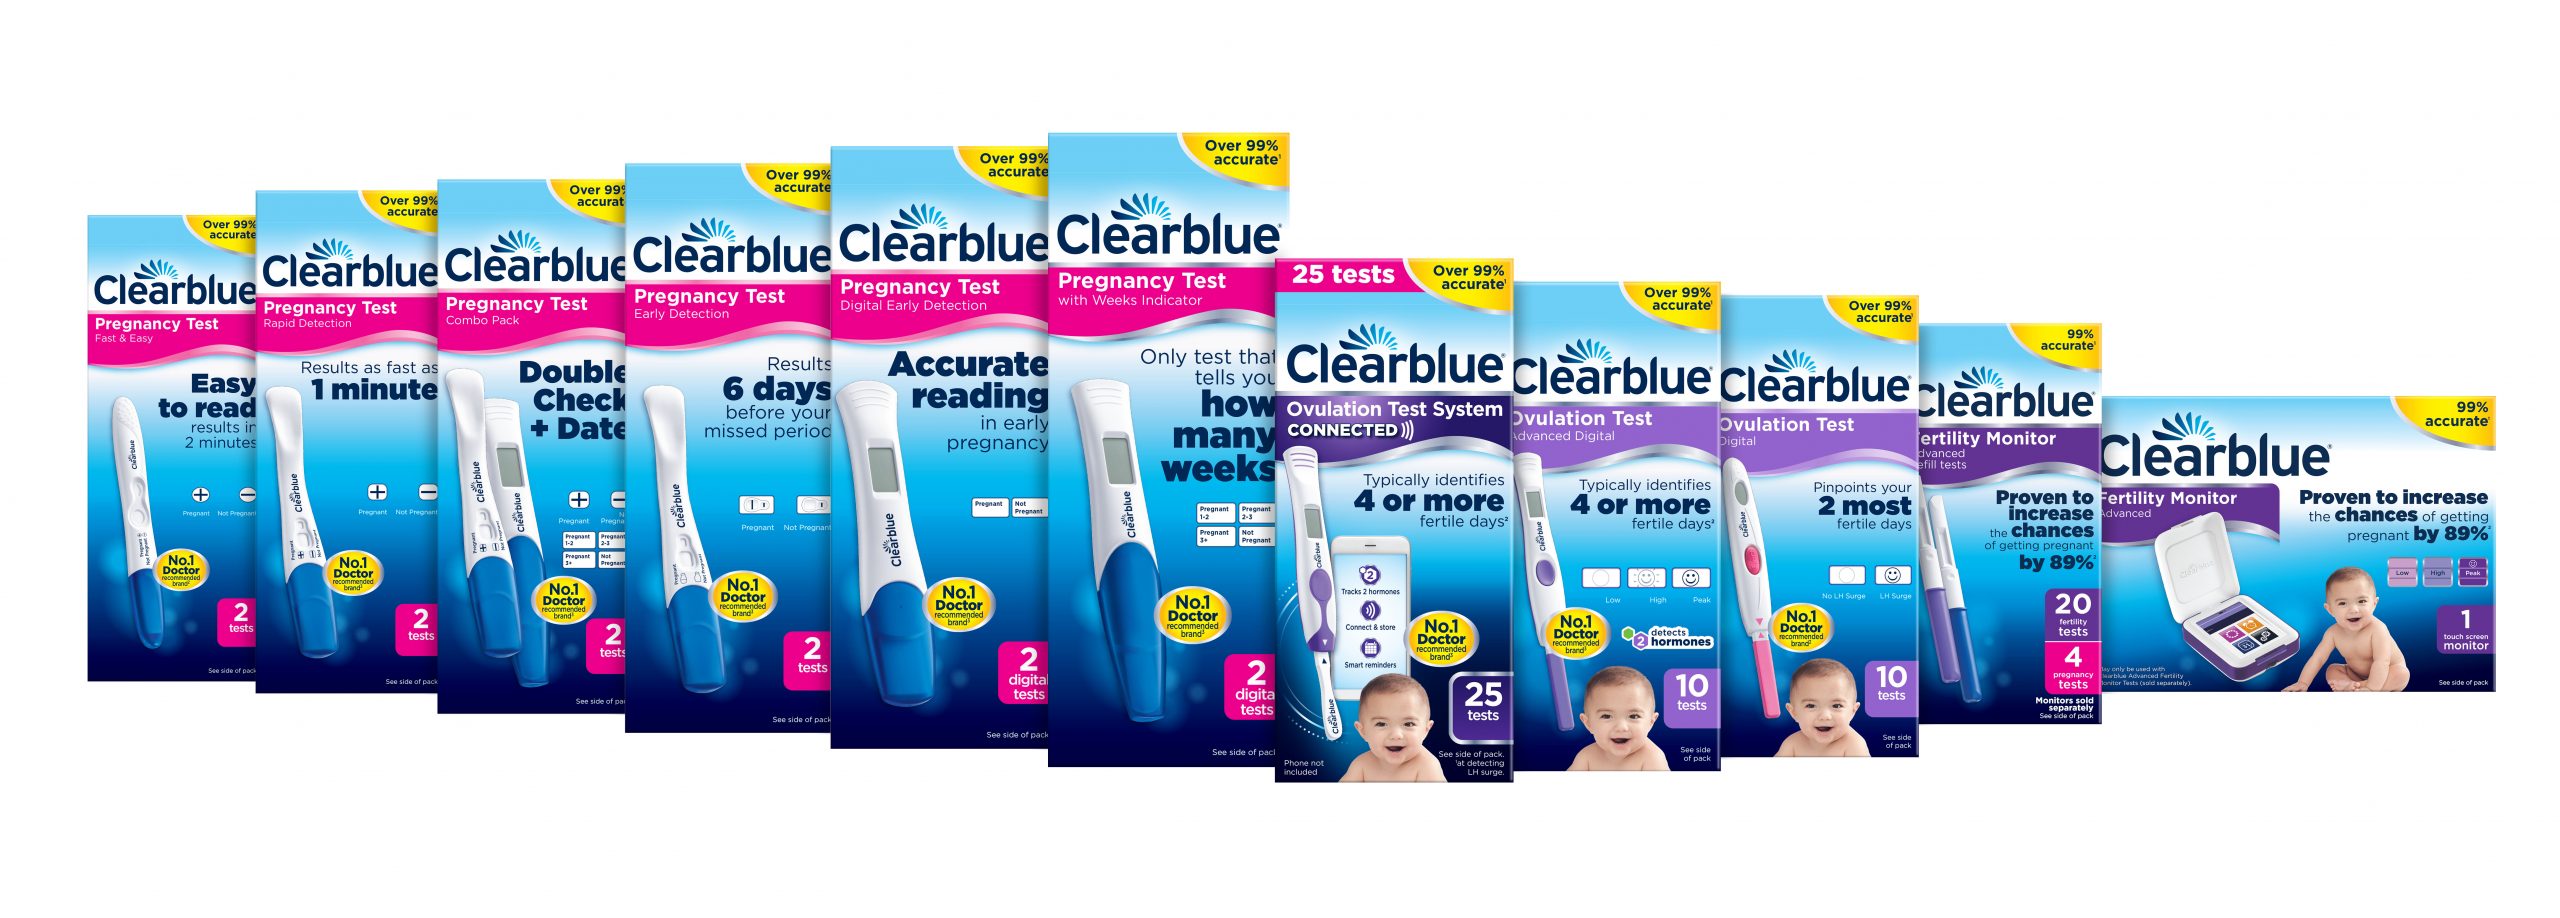 Clearblue® Product Family